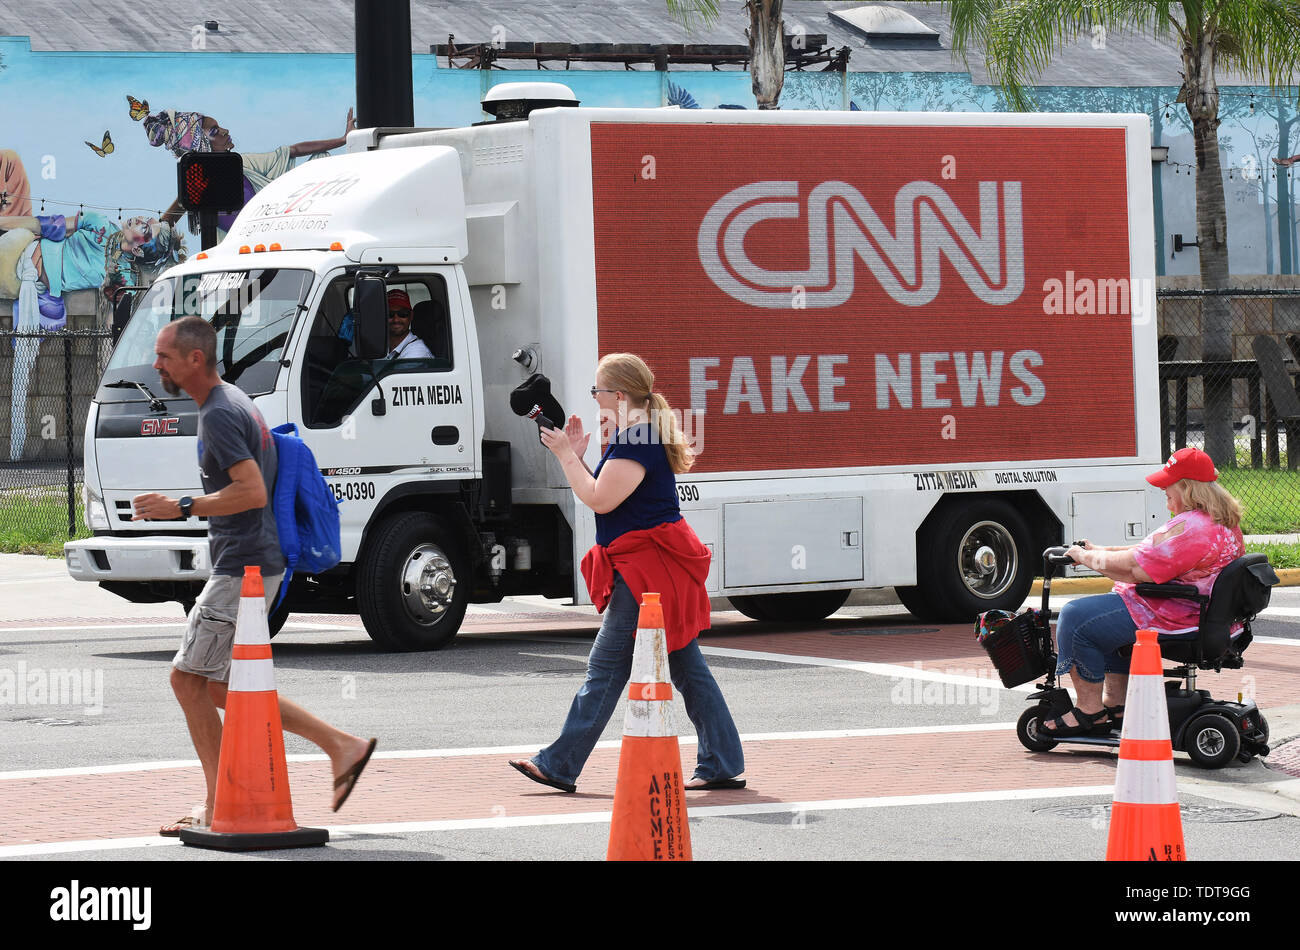 Orlando, Florida, USA. 18th June, 2019. A CNN Fake News sign is driven on a truck near U.S. President Donald Trump's Make America Great Again rally at the Amway Center on June 18, 2019 in Orlando, Florida. This is the kick-off event for Trump's campaign for re-election in 2020. Credit: Paul Hennessy/Alamy Live News Stock Photo